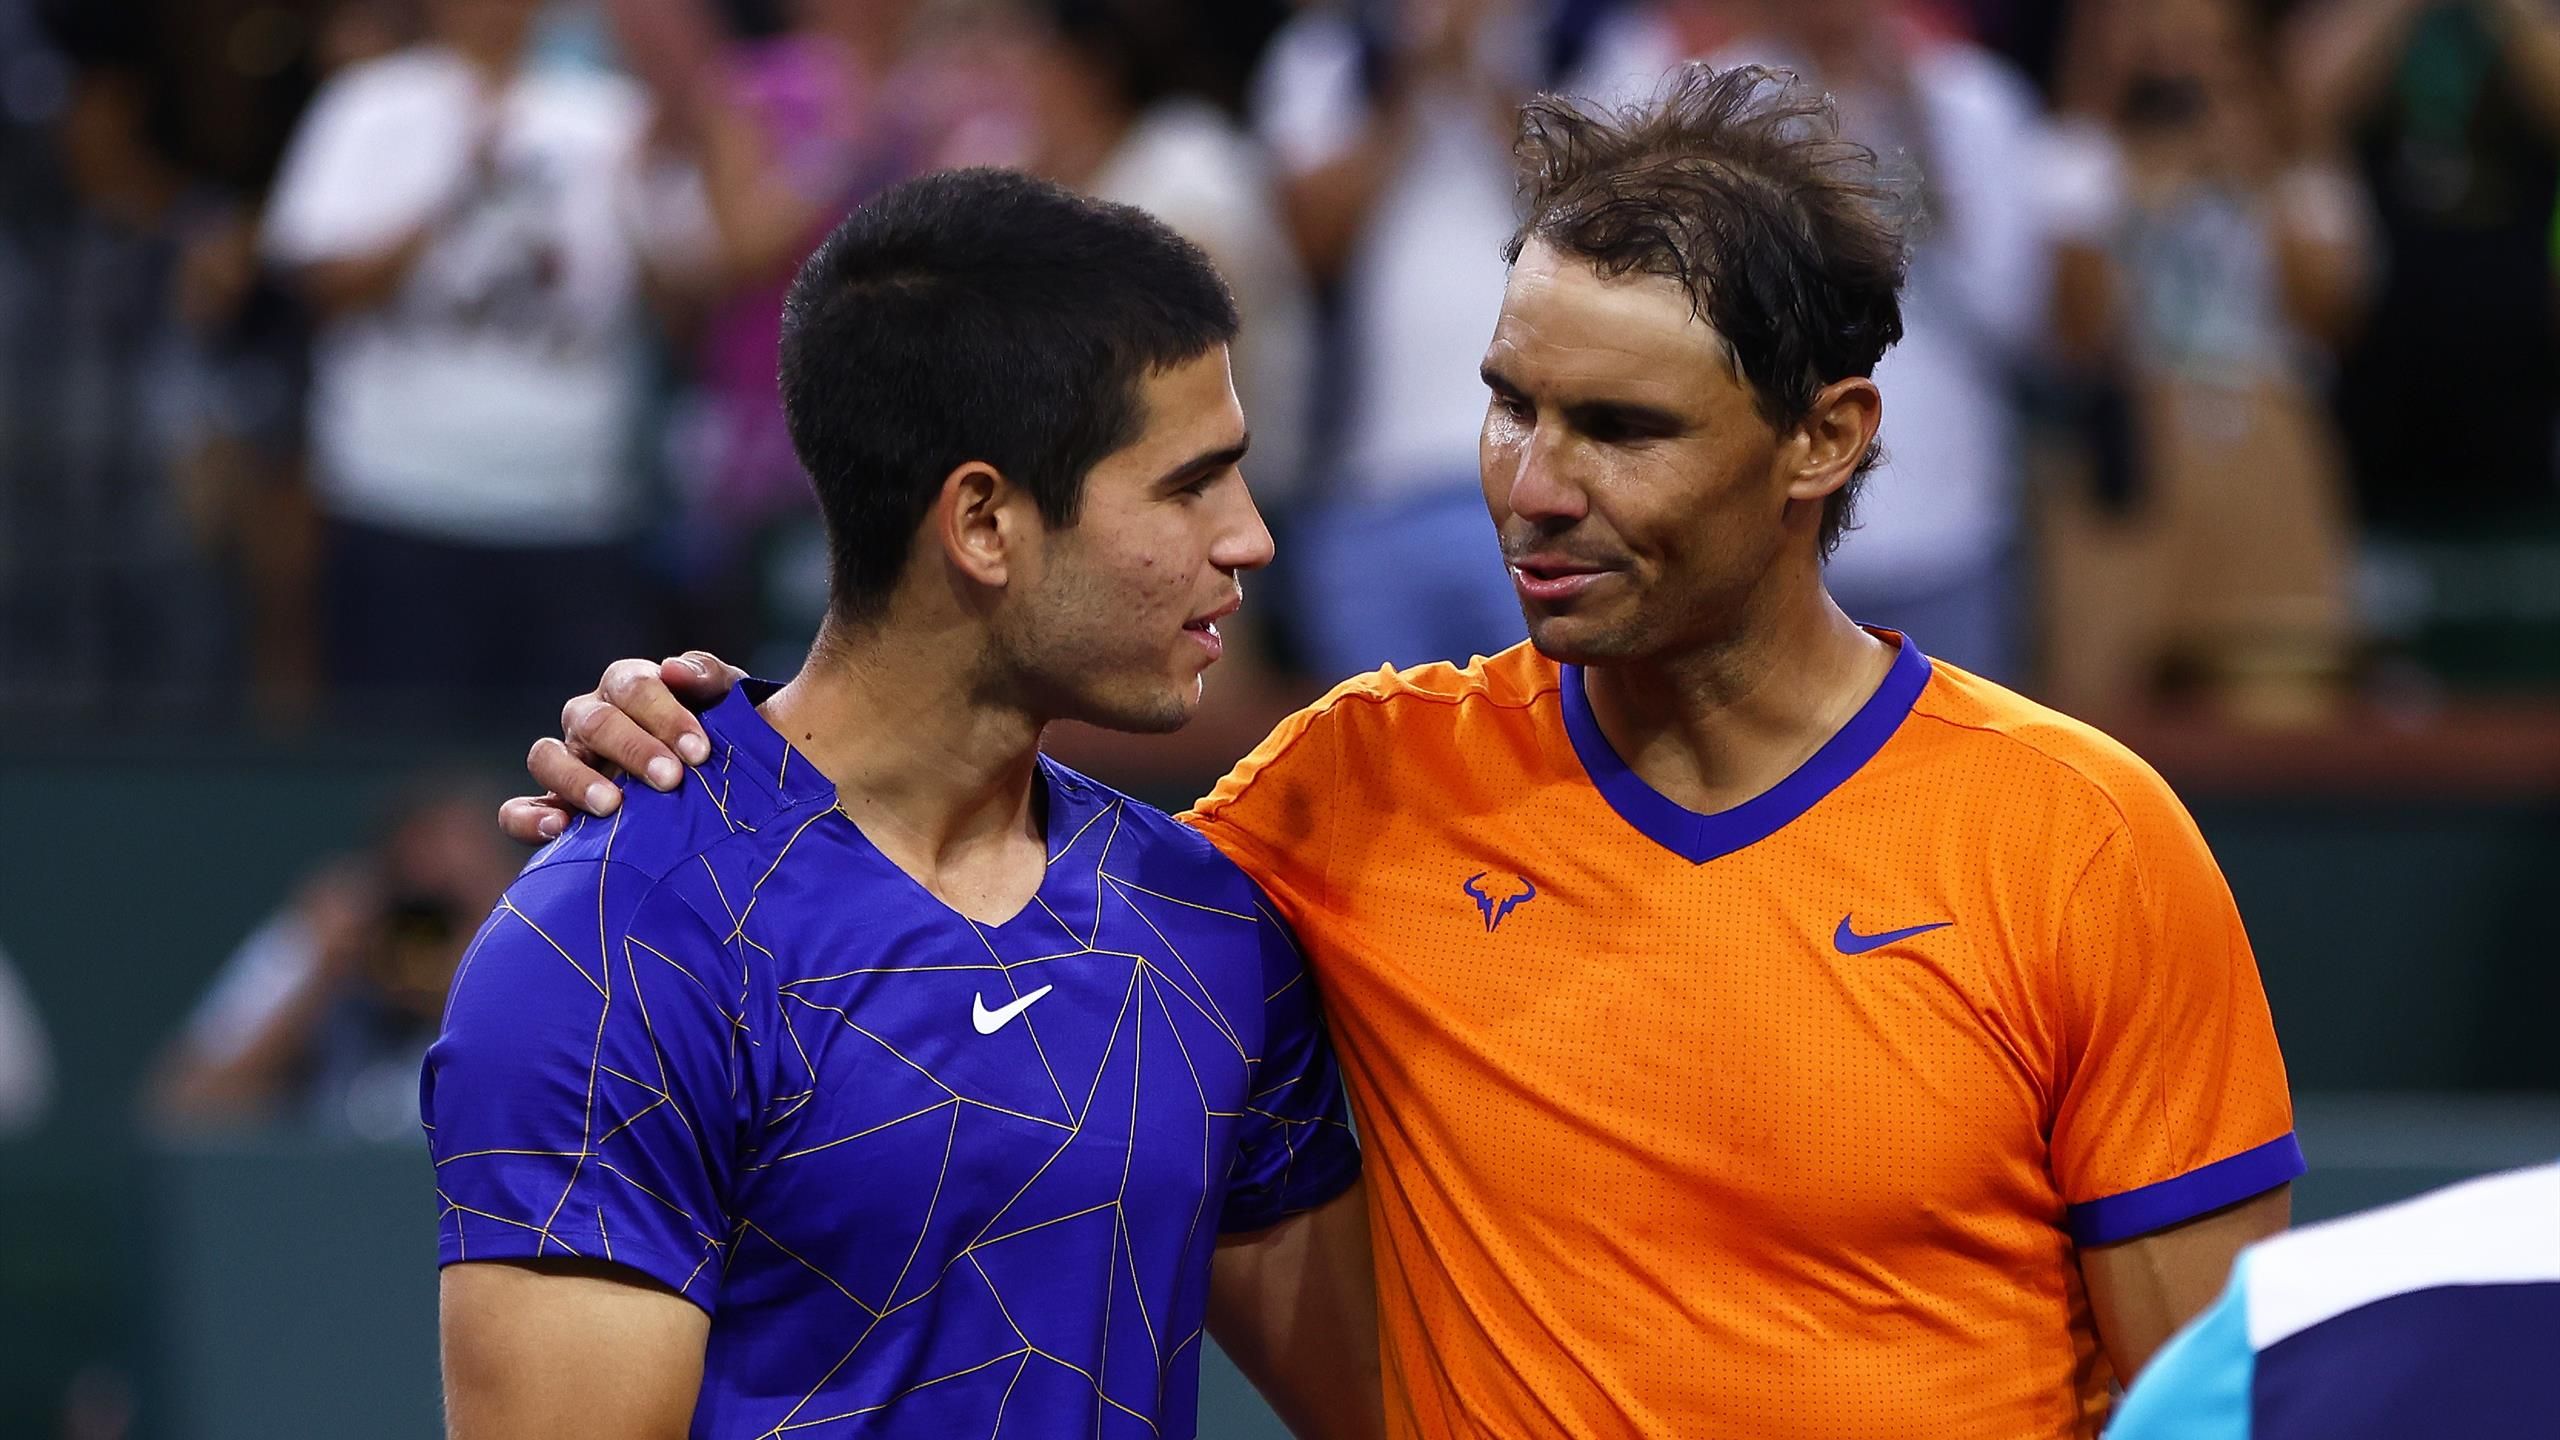 Rafael Nadal and Carlos Alcaraz both pull out of Monte Carlo Masters within minutes of each other